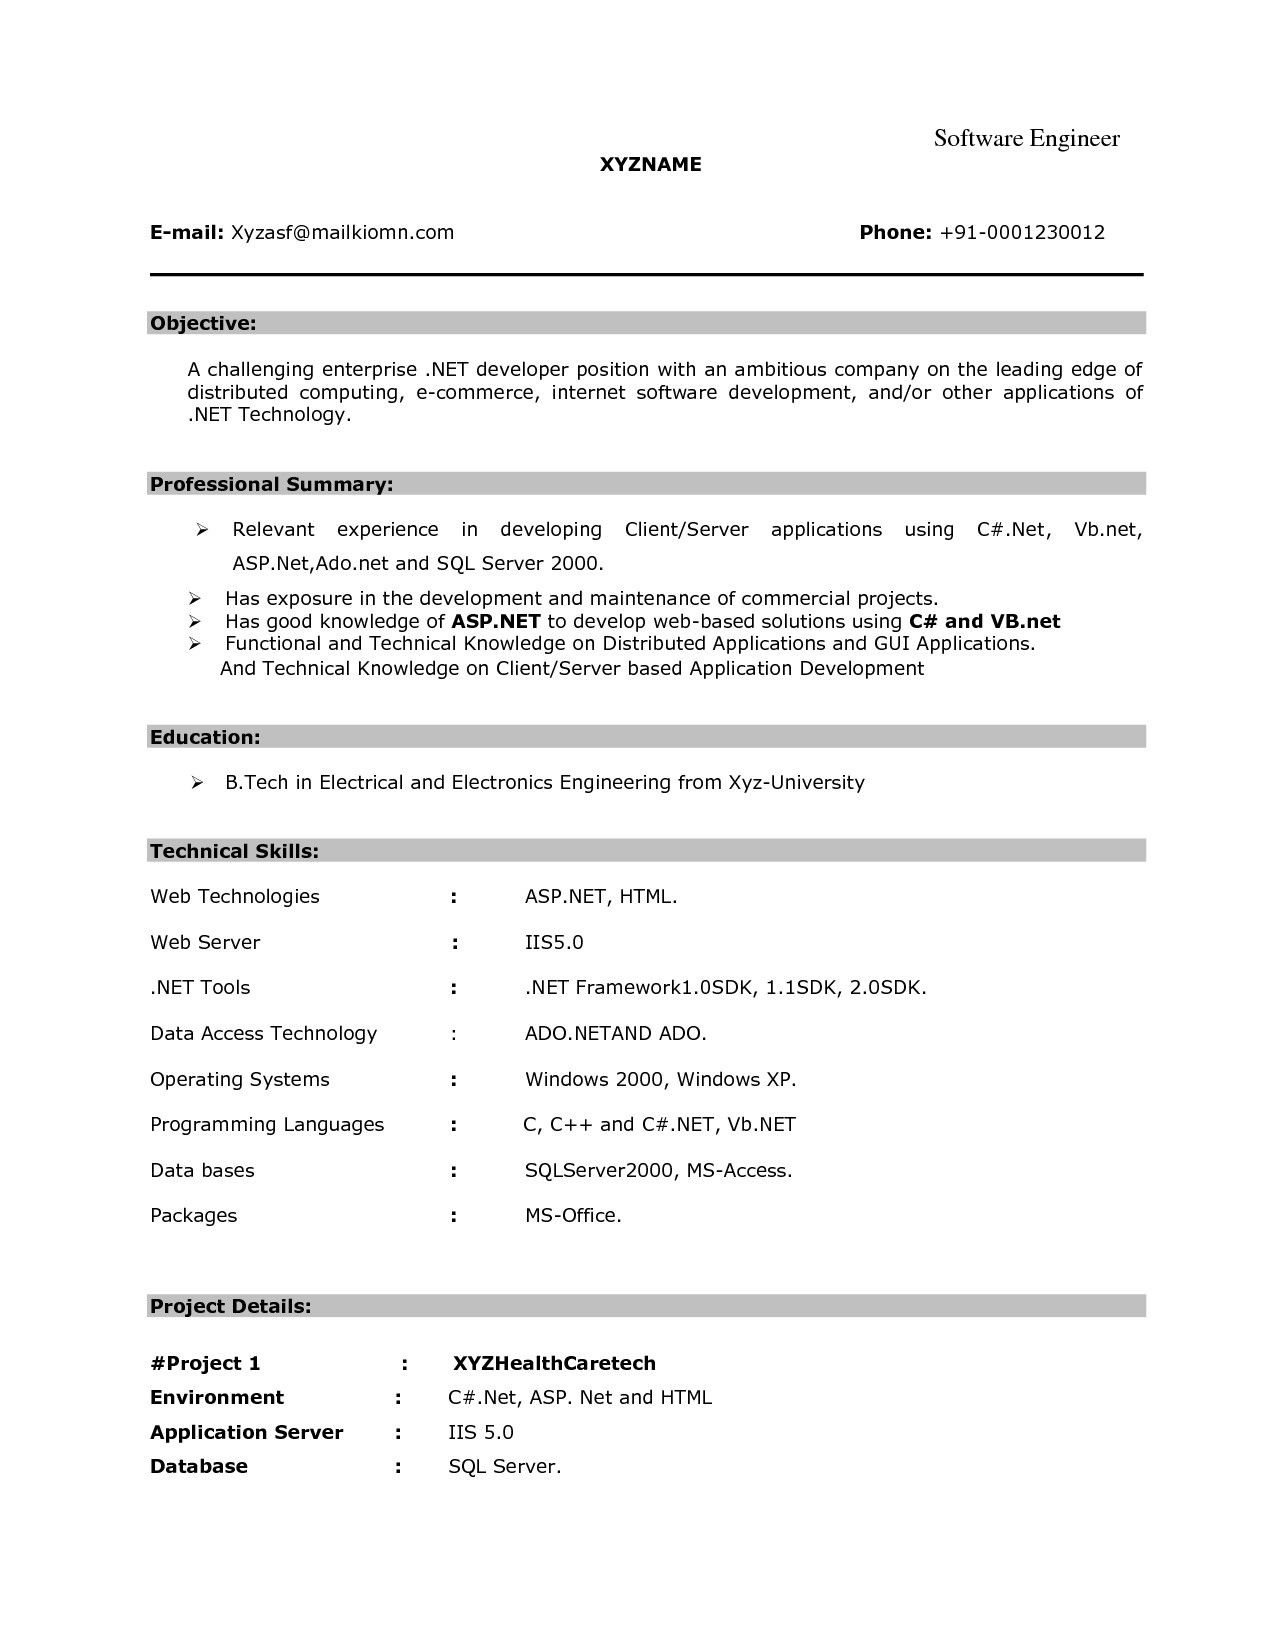 6 Months Experience Resume Sample In software Engineer Resume format for 6 Months Experienced software Engineer – Resume …